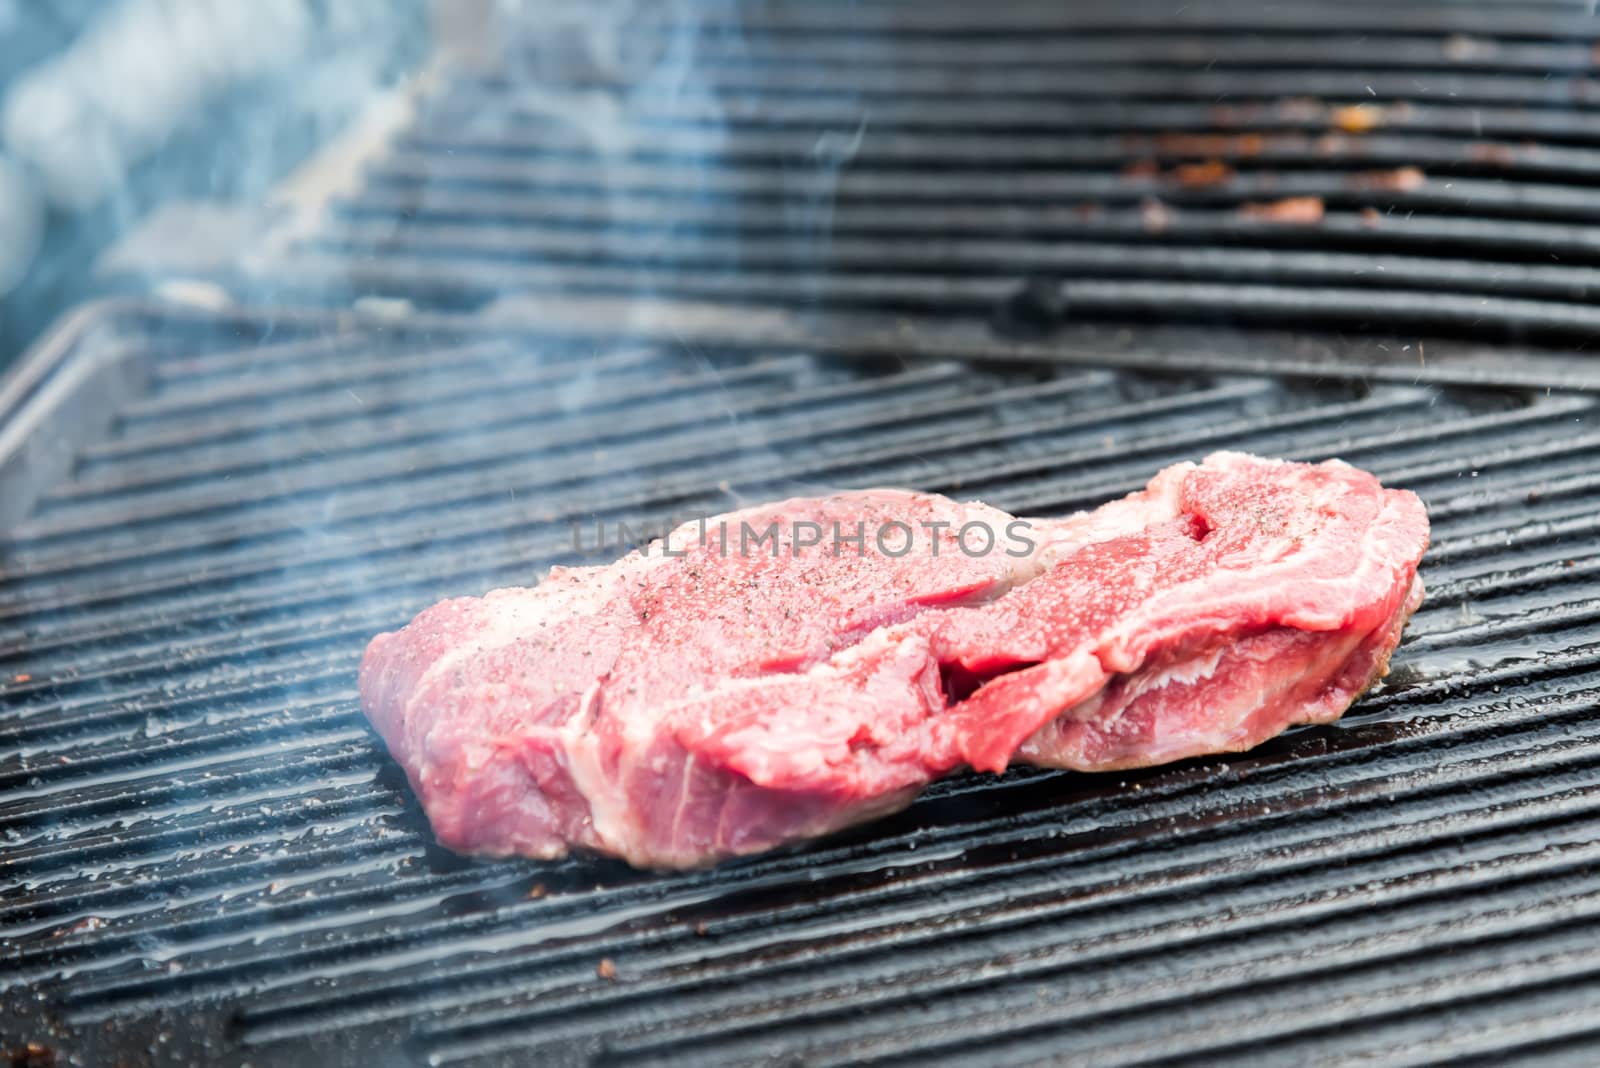 the raw steak with spices on metal grill